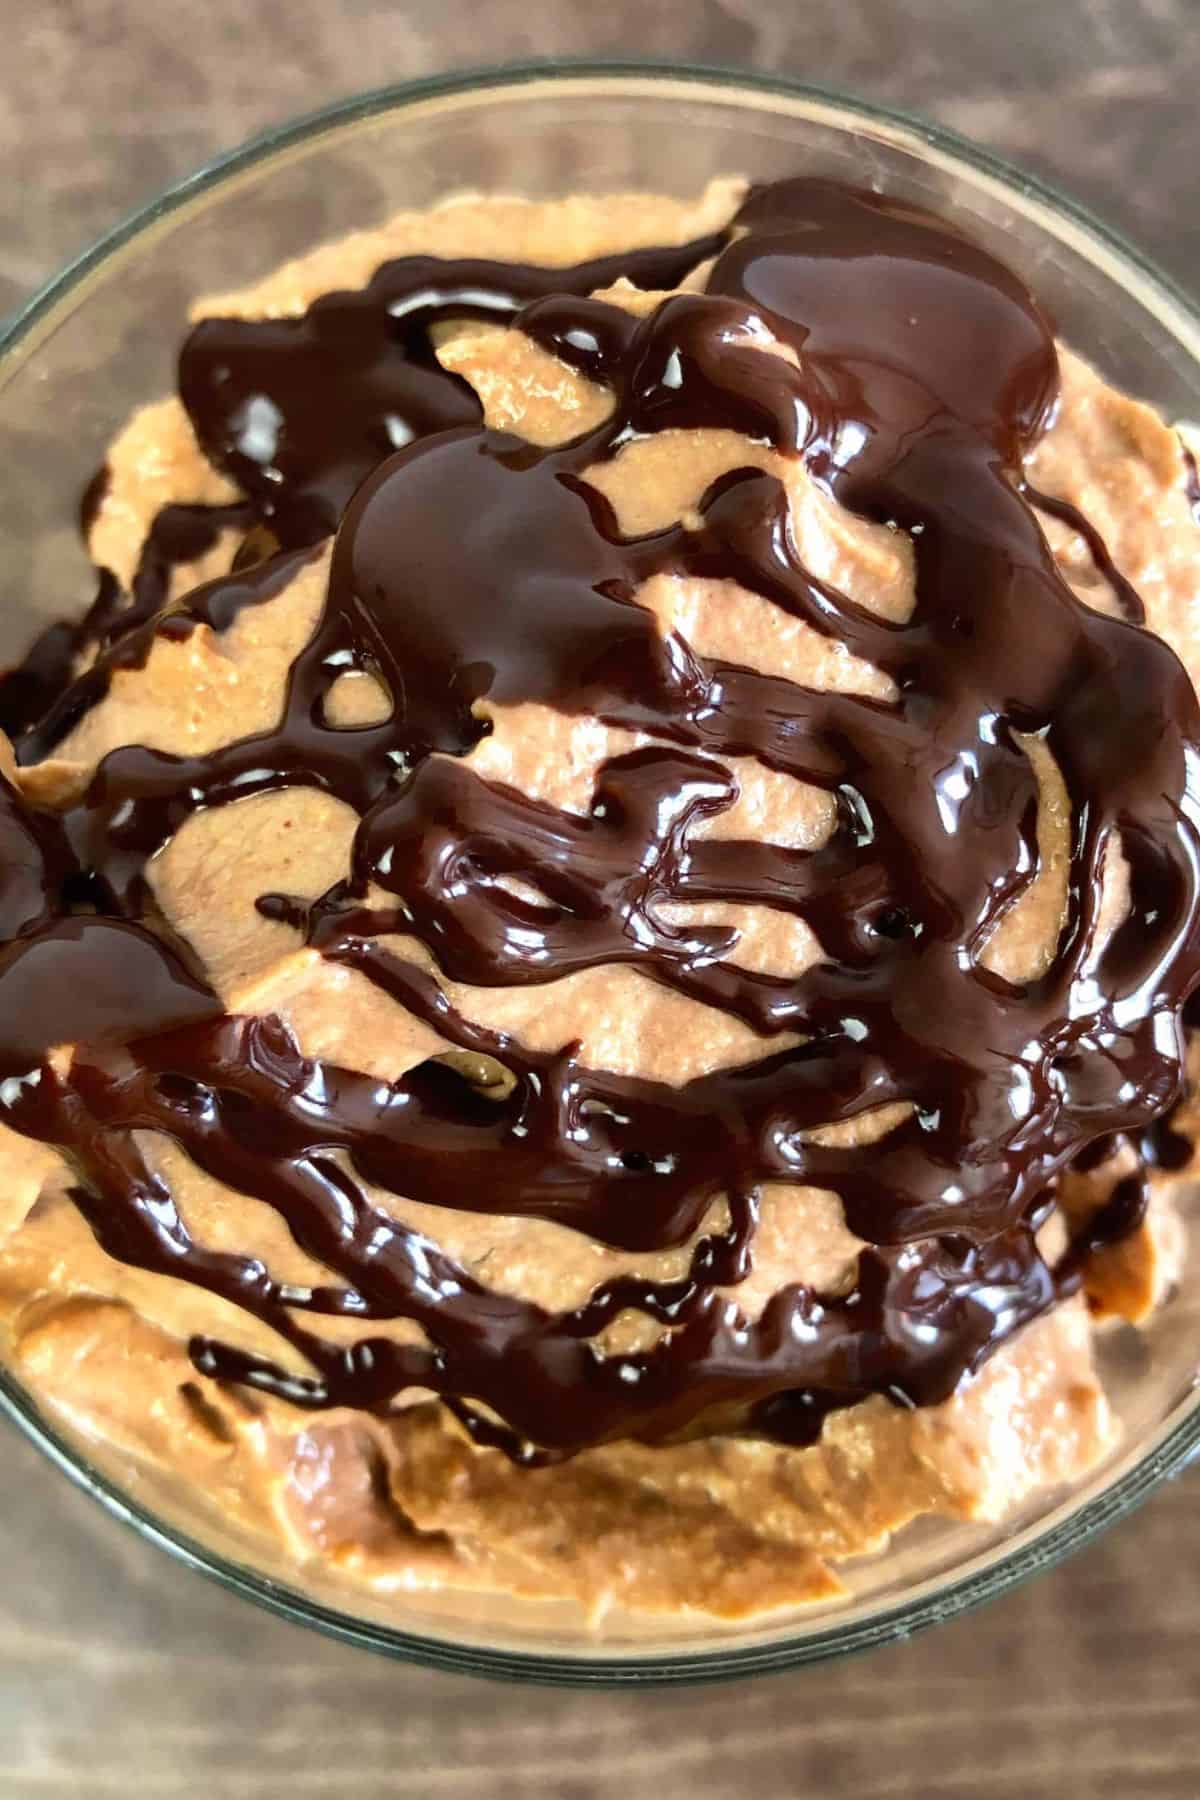 Keto peanut butter parfait drizzled with chocolate in a small glass.